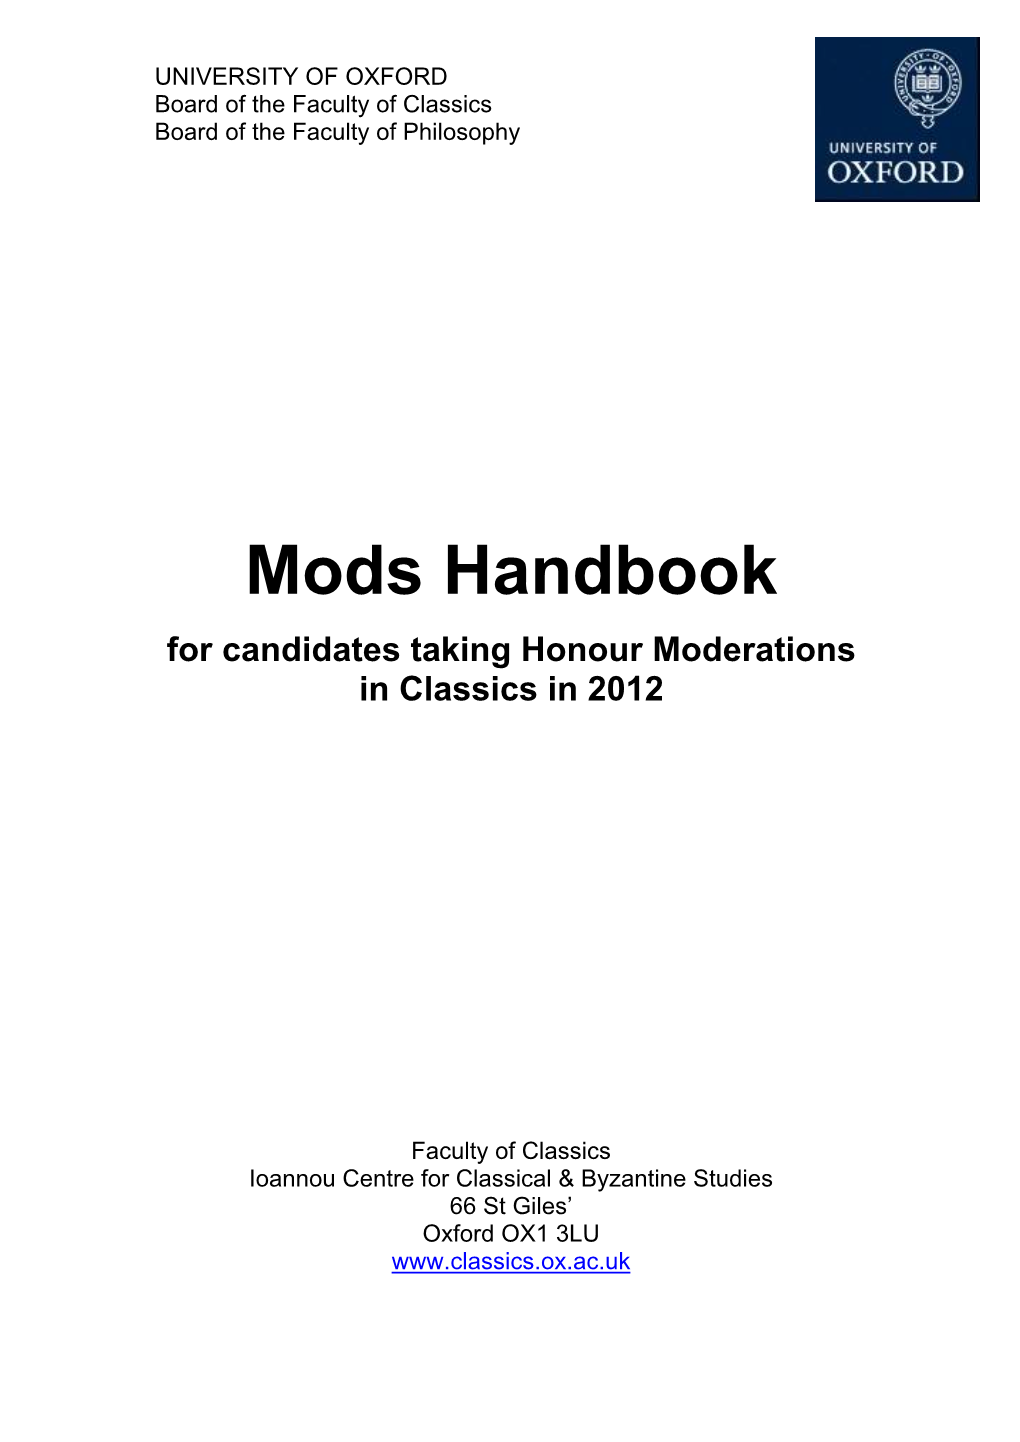 Mods Handbook for Candidates Taking Honour Moderations in Classics in 2012